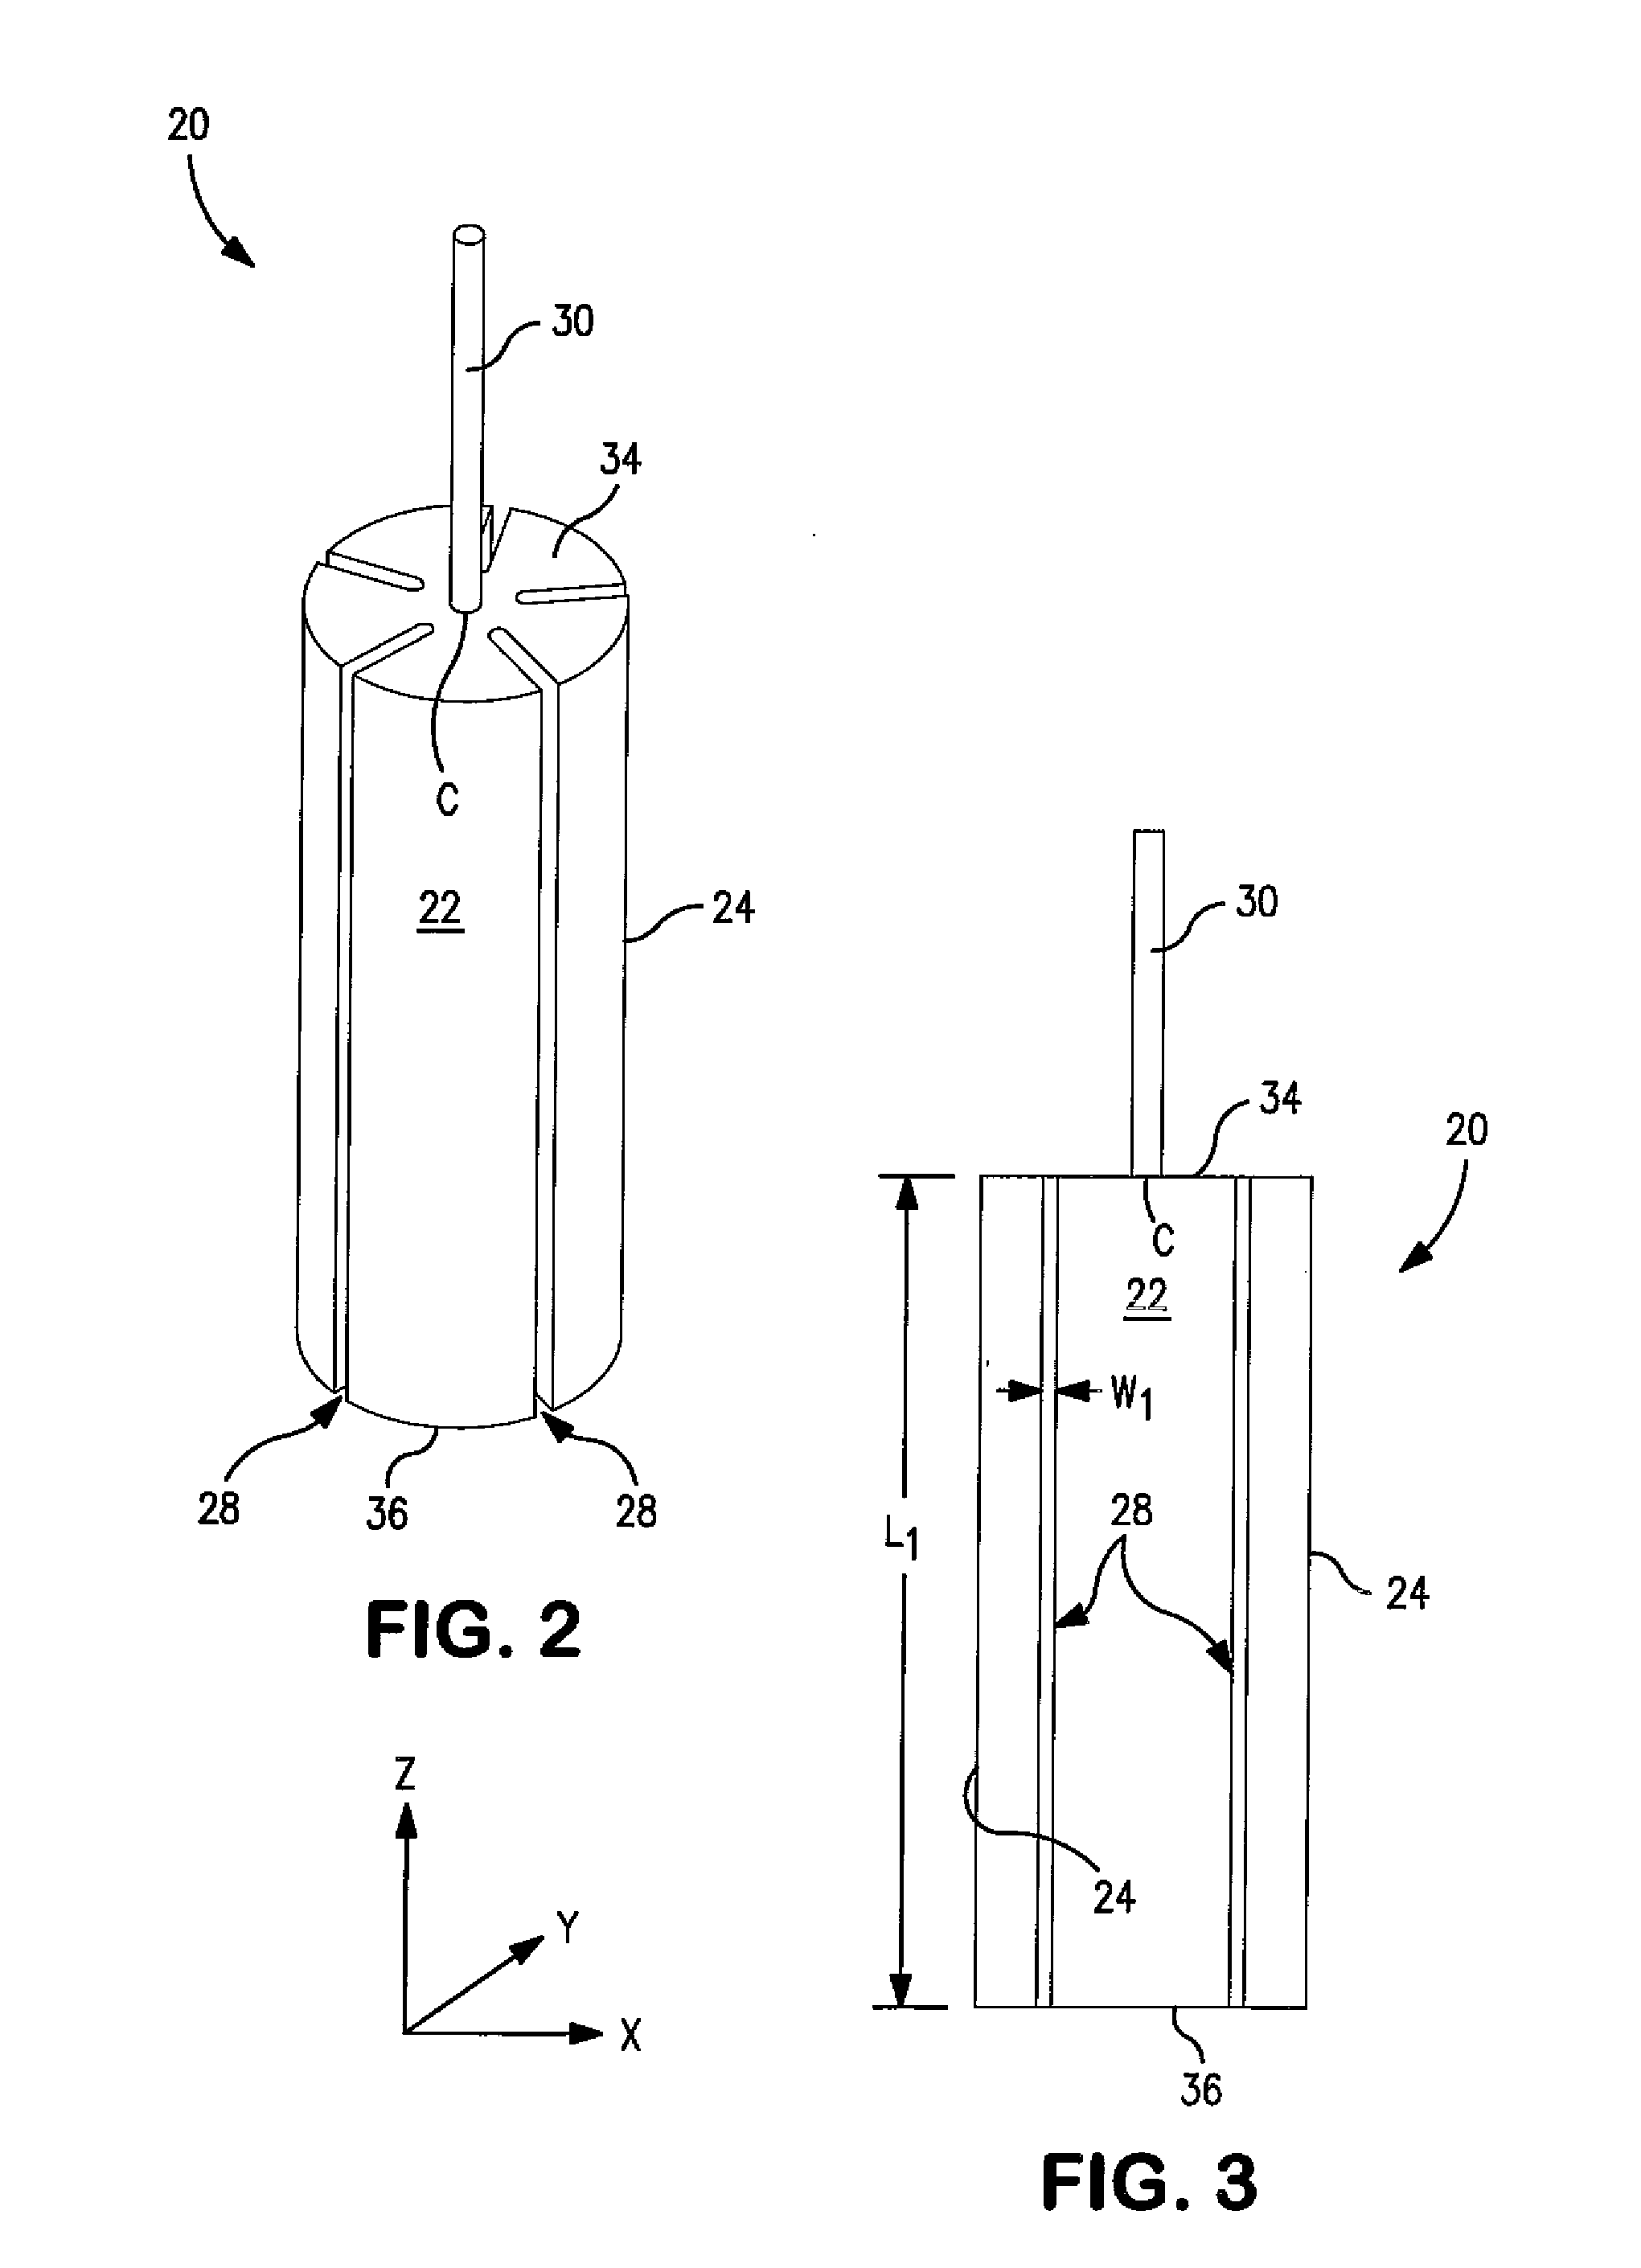 Wet Capacitor Cathode Containing a Conductive Coating Formed Anodic Electrochemical Polymerization of a Colloidal Suspension